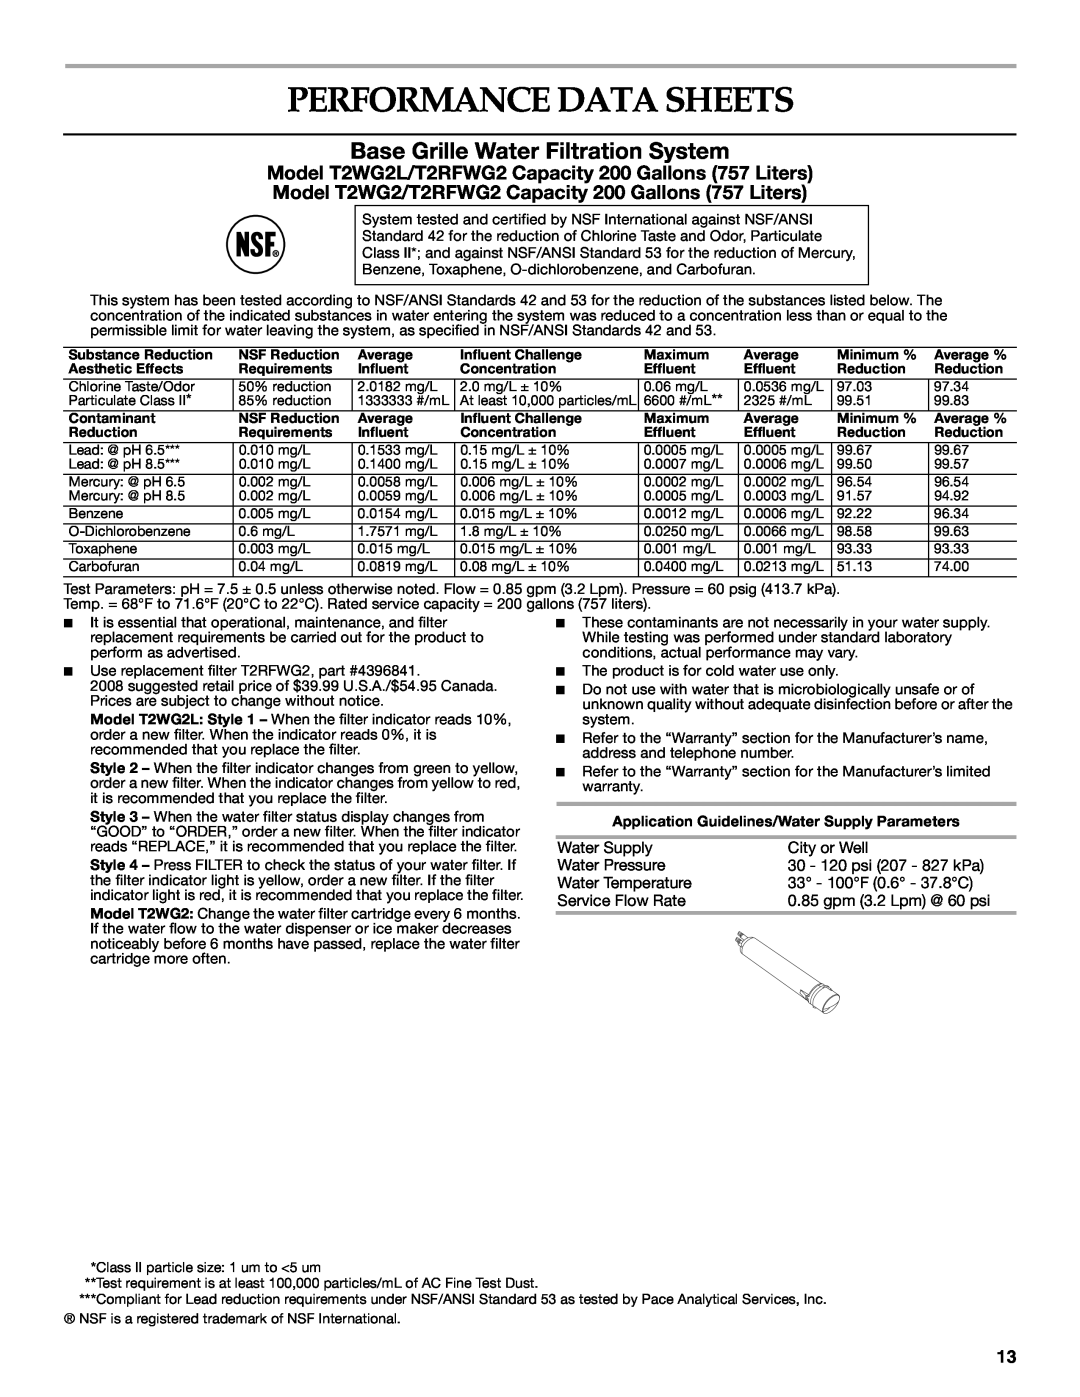 KitchenAid W10213162A installation instructions Performance Data Sheets, Base Grille Water Filtration System 